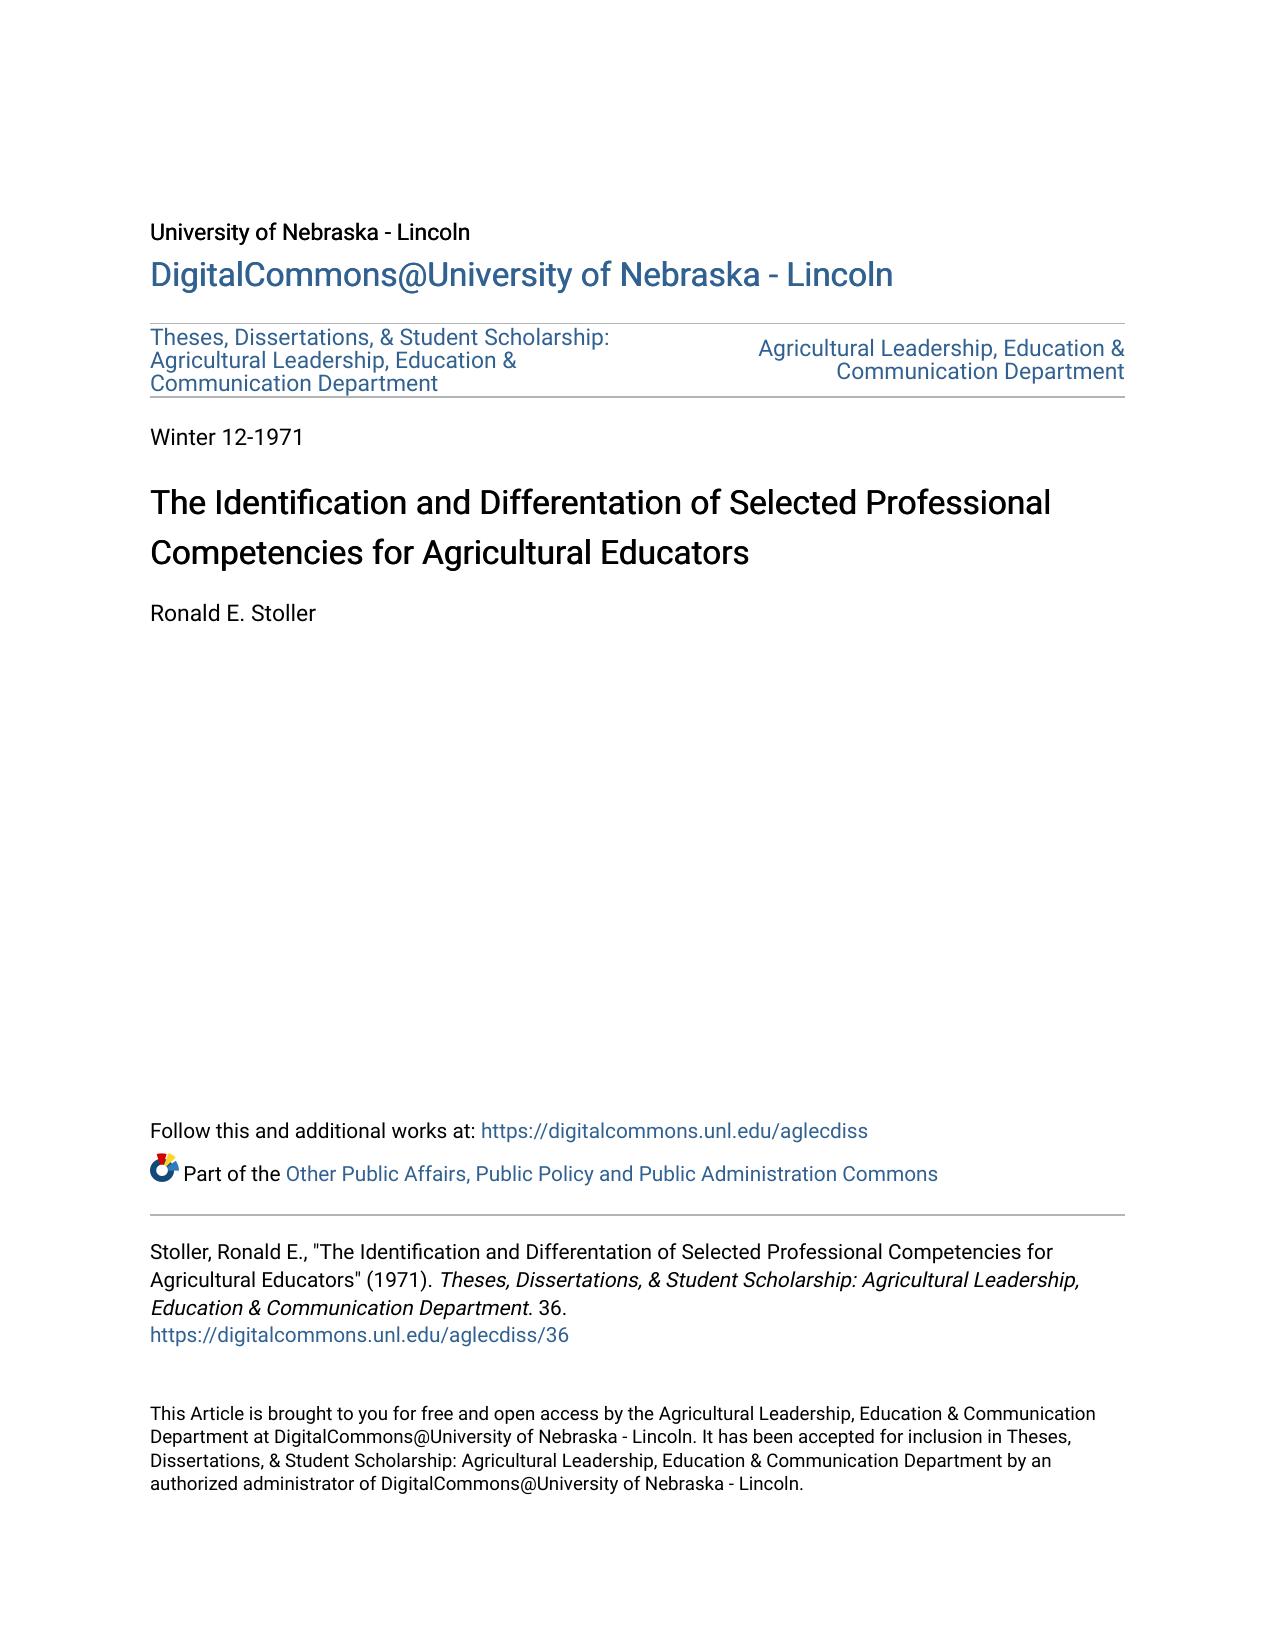 The Identification and Differentation of Selected Professional Competencies for Agricultural Educators